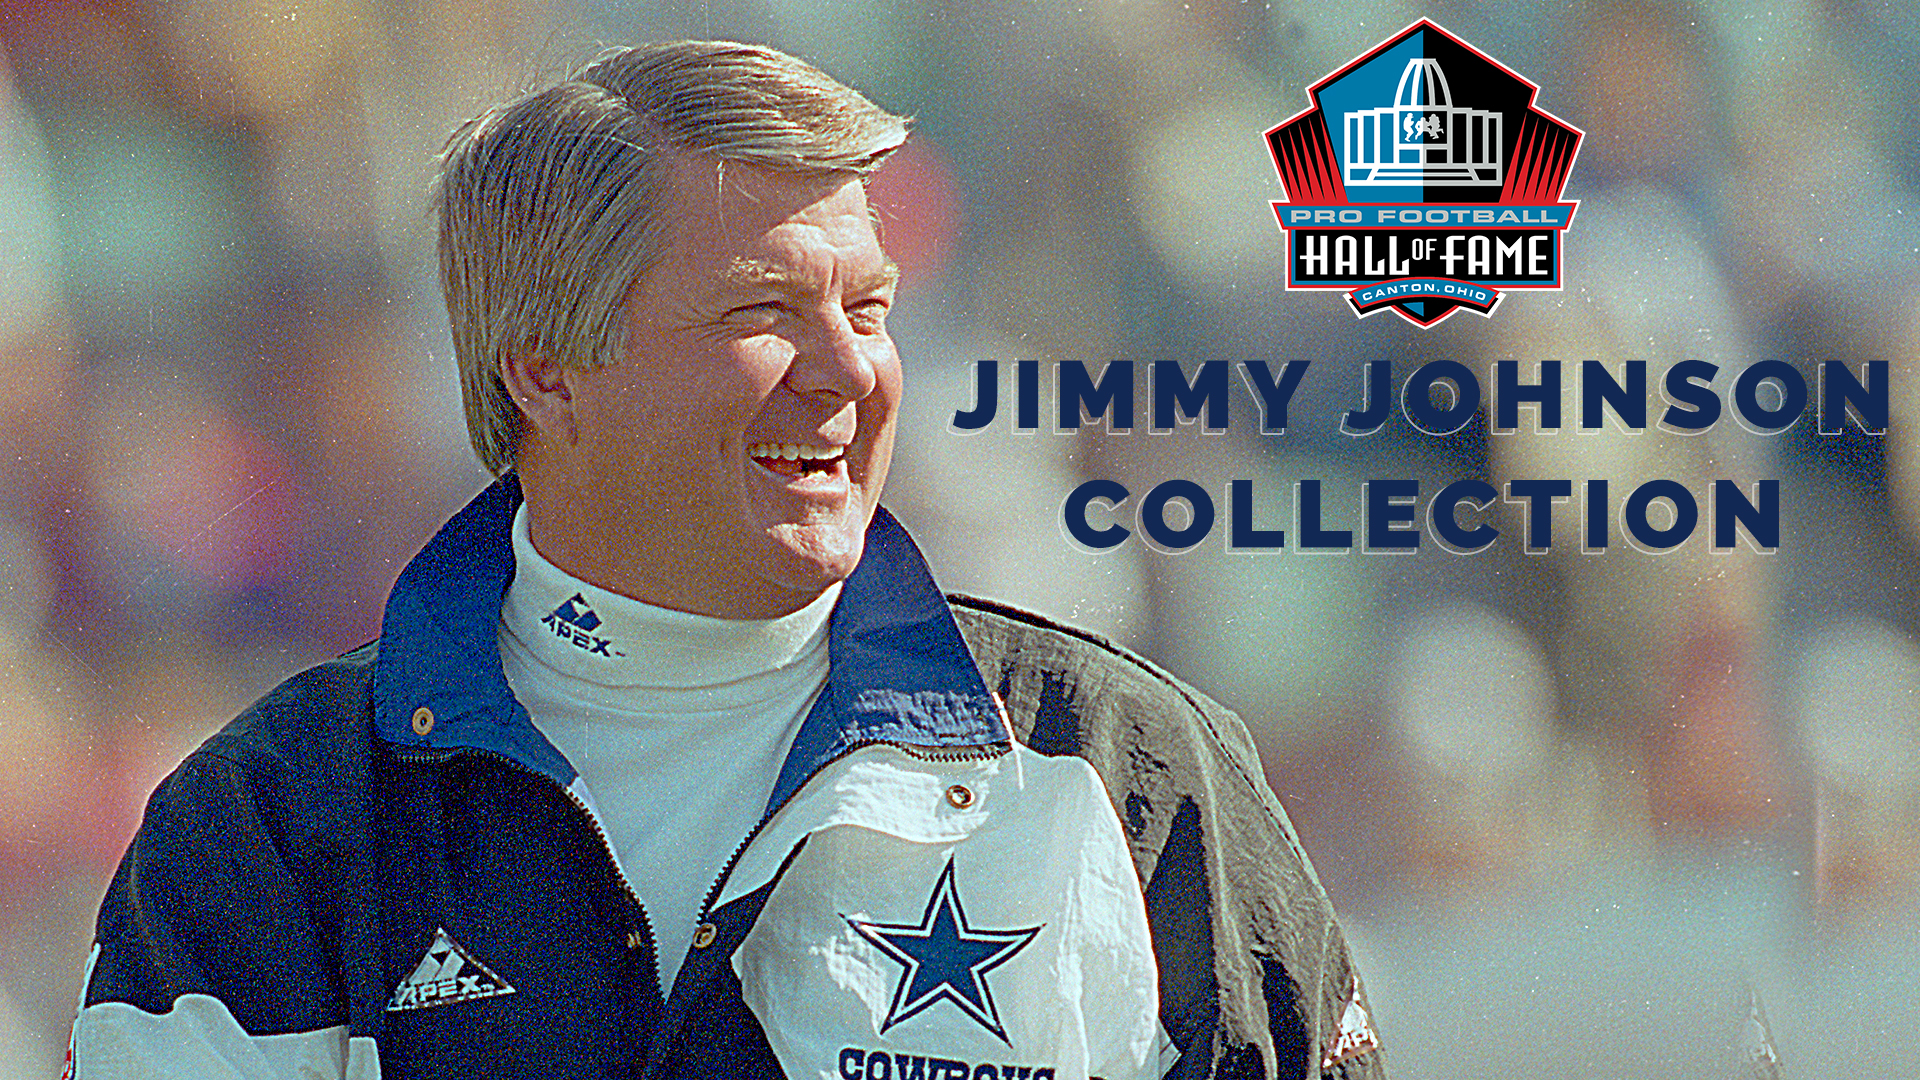 Jimmy_Johnson_Collection_1920x1080